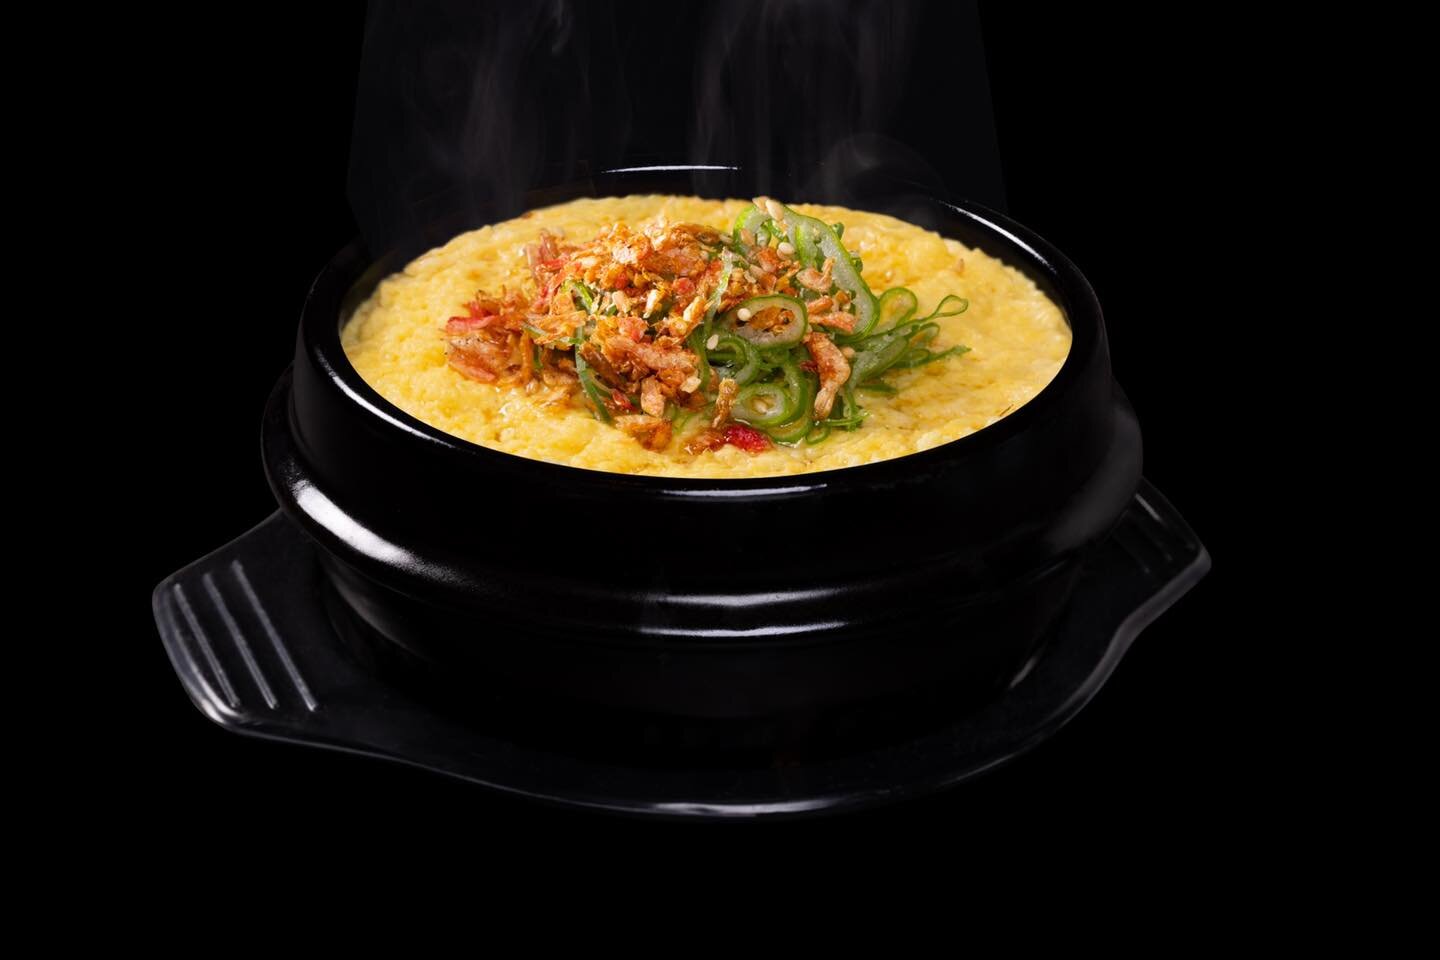 𝐄𝐠𝐠 𝐒𝐨𝐮𝐟𝐟𝐥𝐞 also known as 𝐆𝐲𝐞𝐫𝐚𝐧𝐣𝐣𝐢𝐦, is a popular Korean savory egg custard side dish that goes well with any Korean meal; Breakfast, lunch, dinner, at home or restaurants. Anytime, anywhere!

Gyeran refers to egg, and jjim means